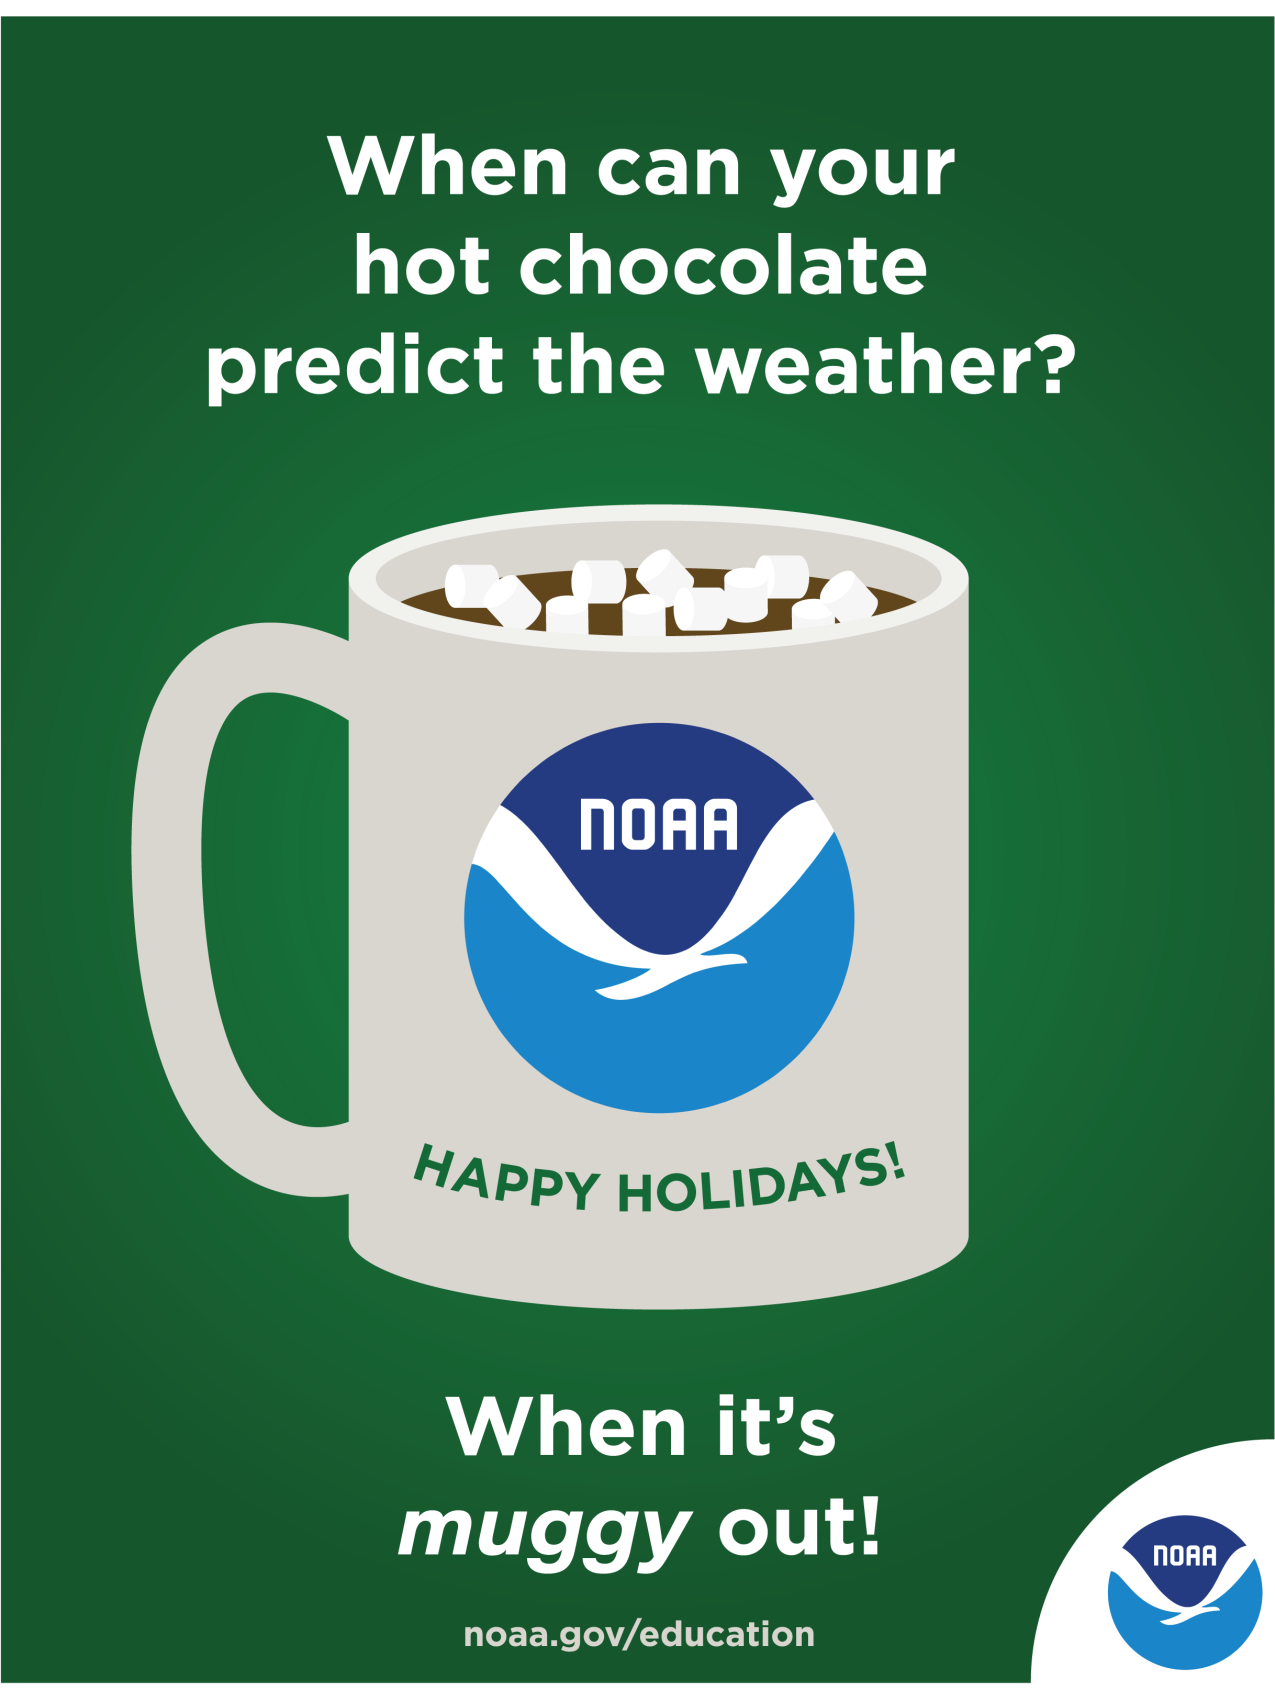 Sea-son's greetings from NOAA Education